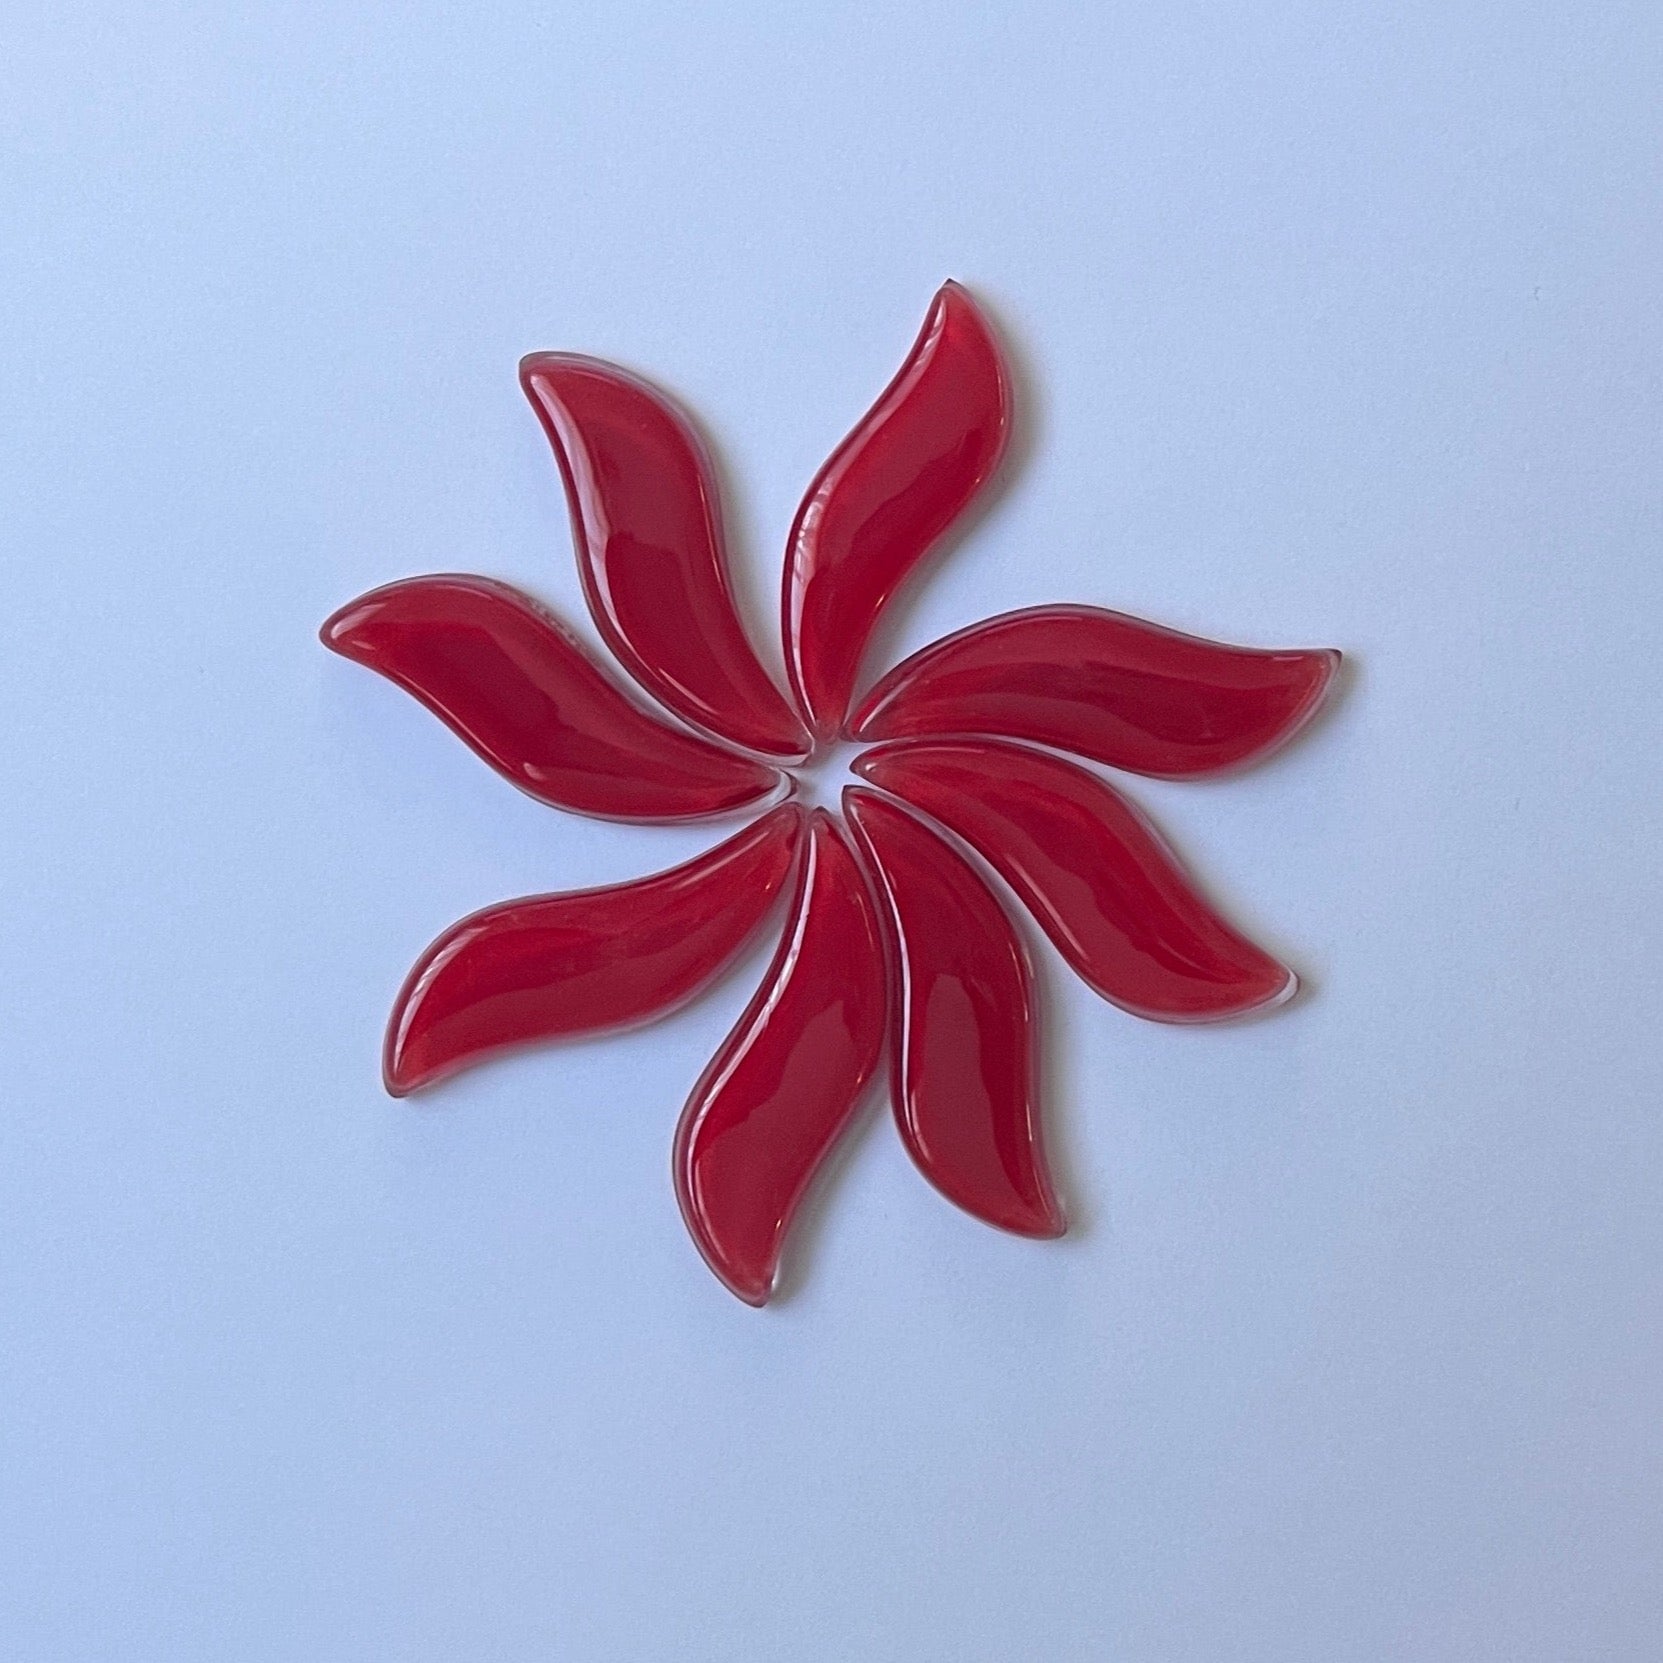 Wavy Glass Petals/Leaves - Large - set of 8